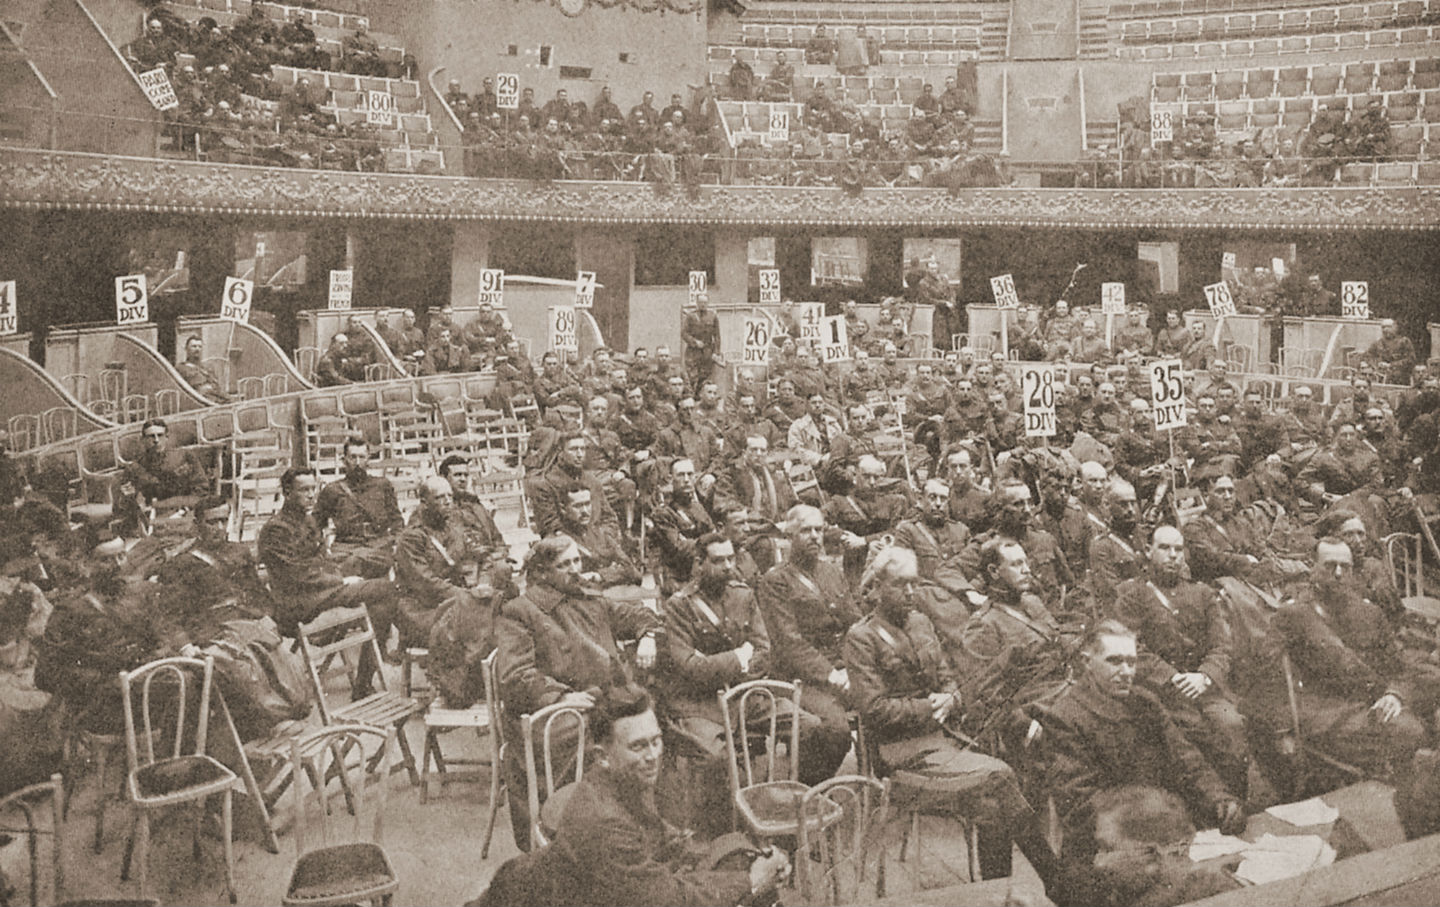 November 10, 1919: The American Legion Has Its First National Convention